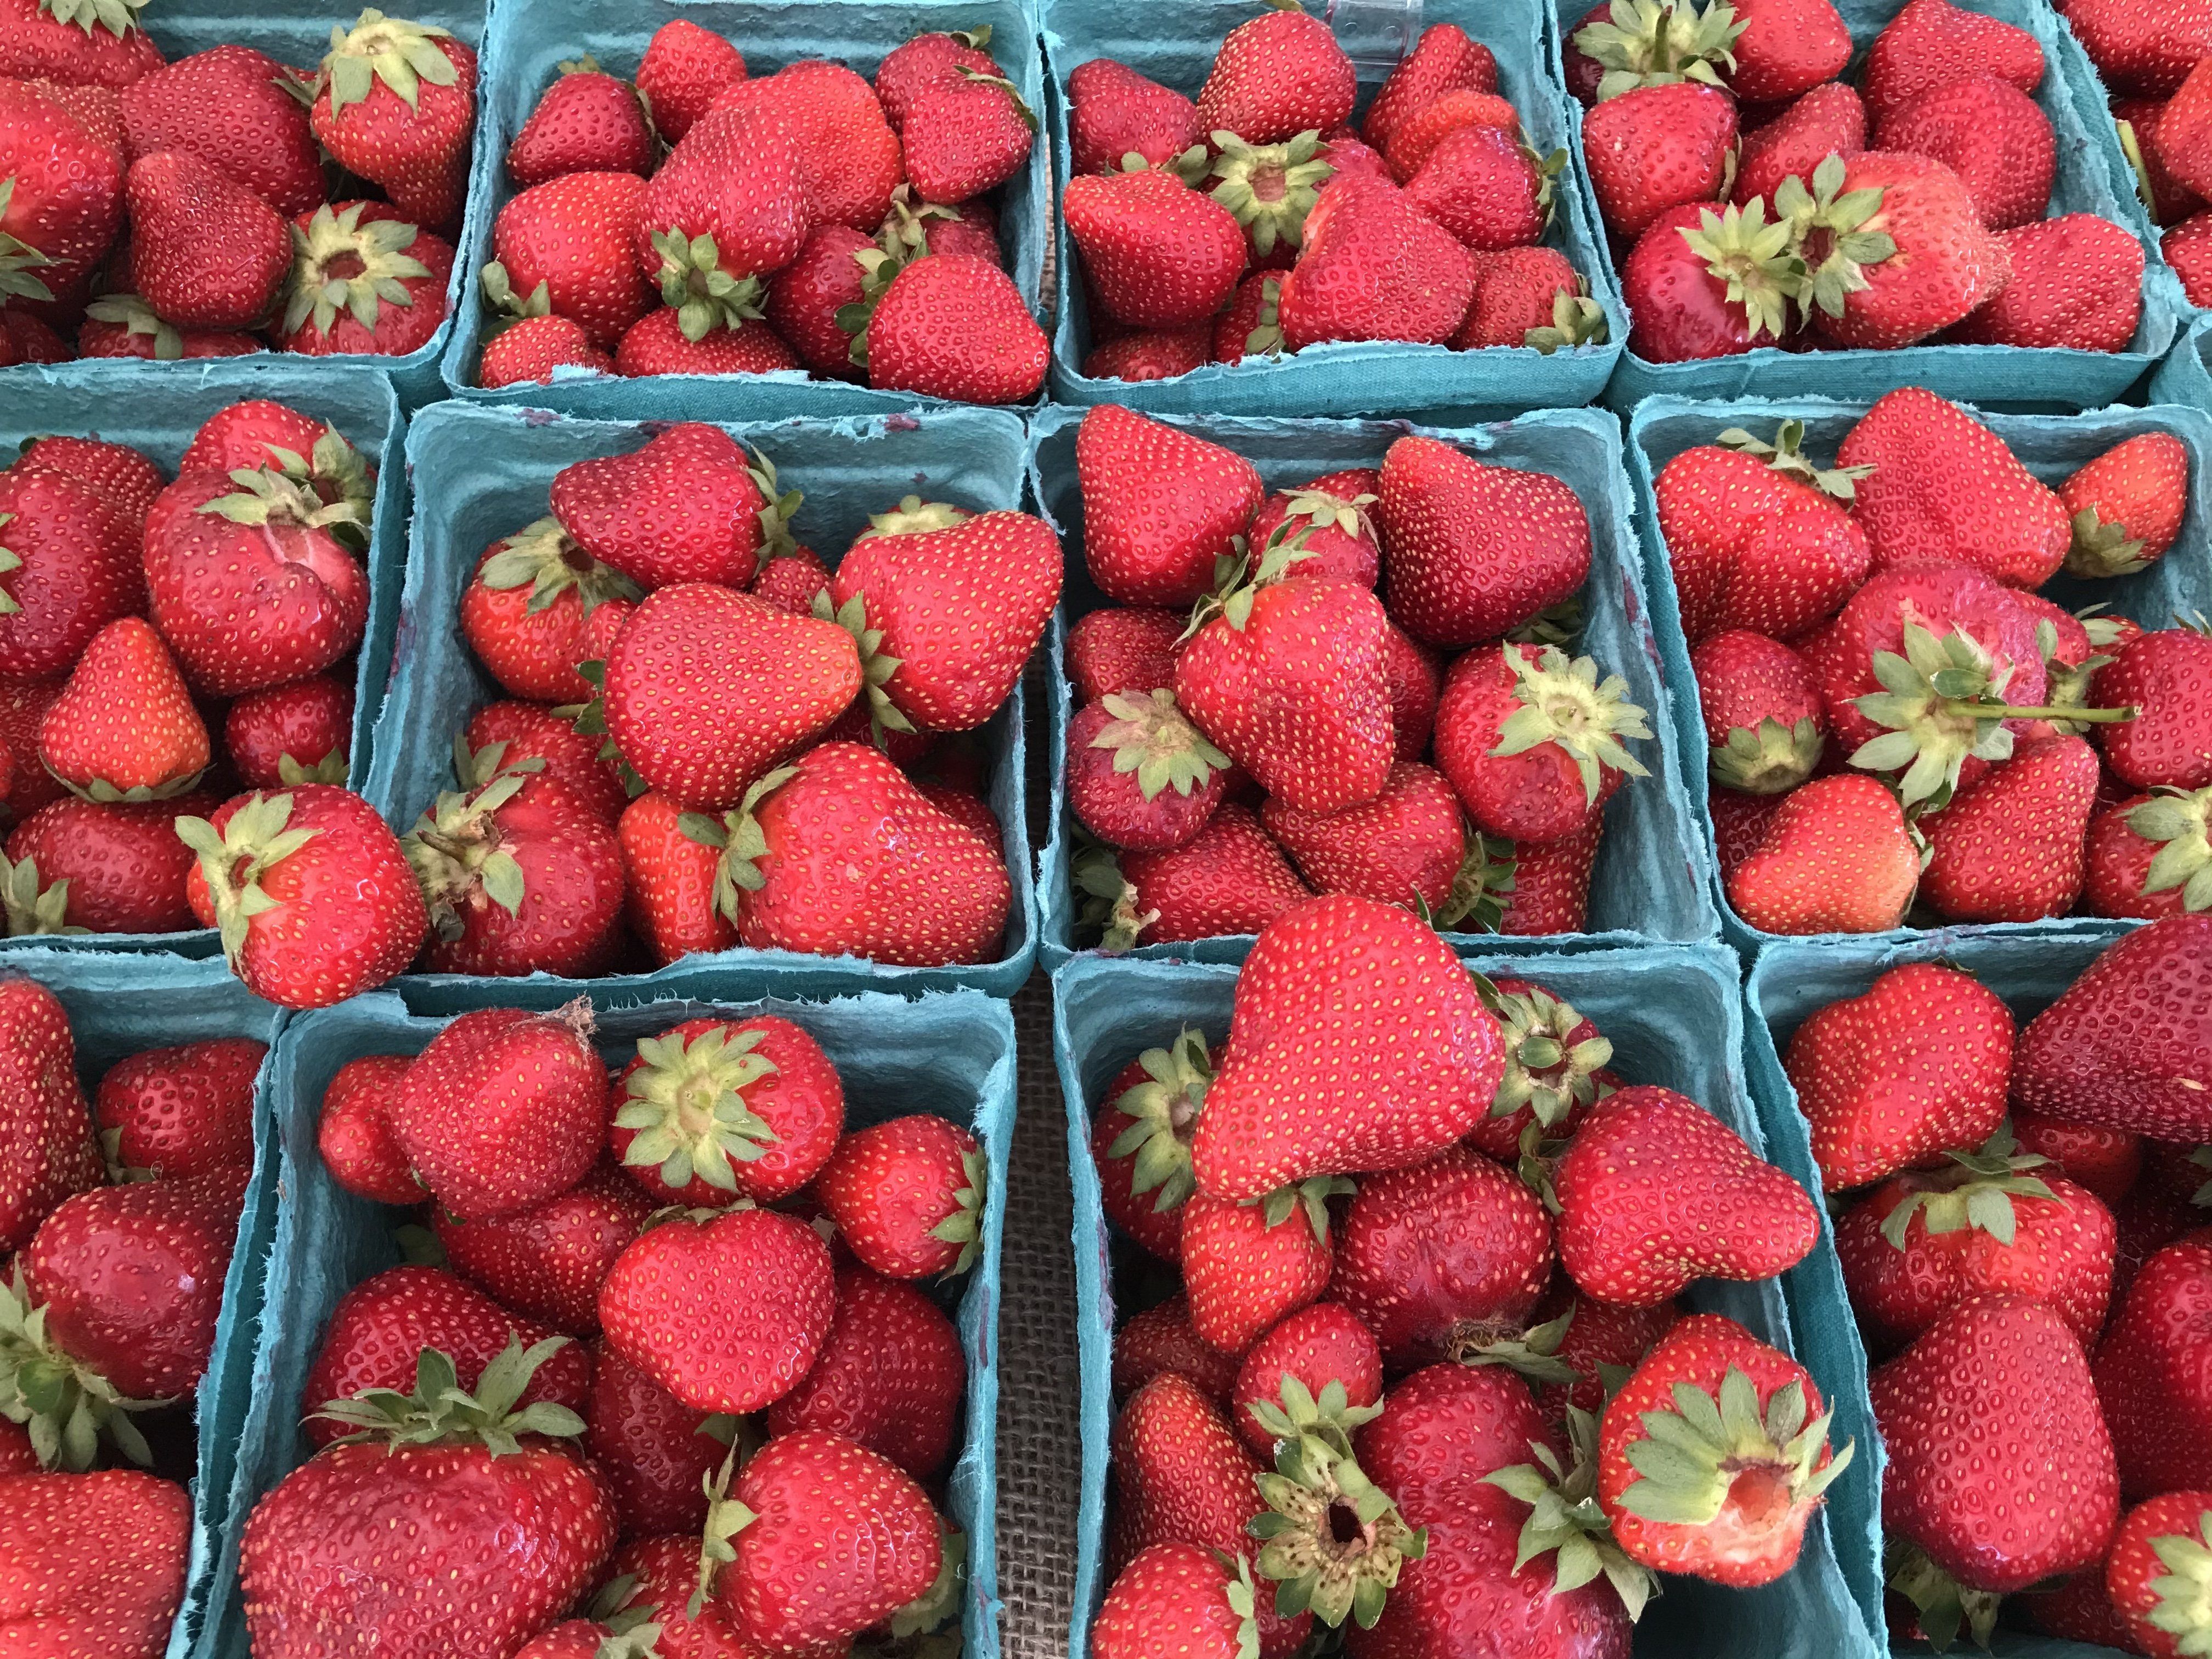 Previous Happening: Central Oregon Strawberry Season is Upon us